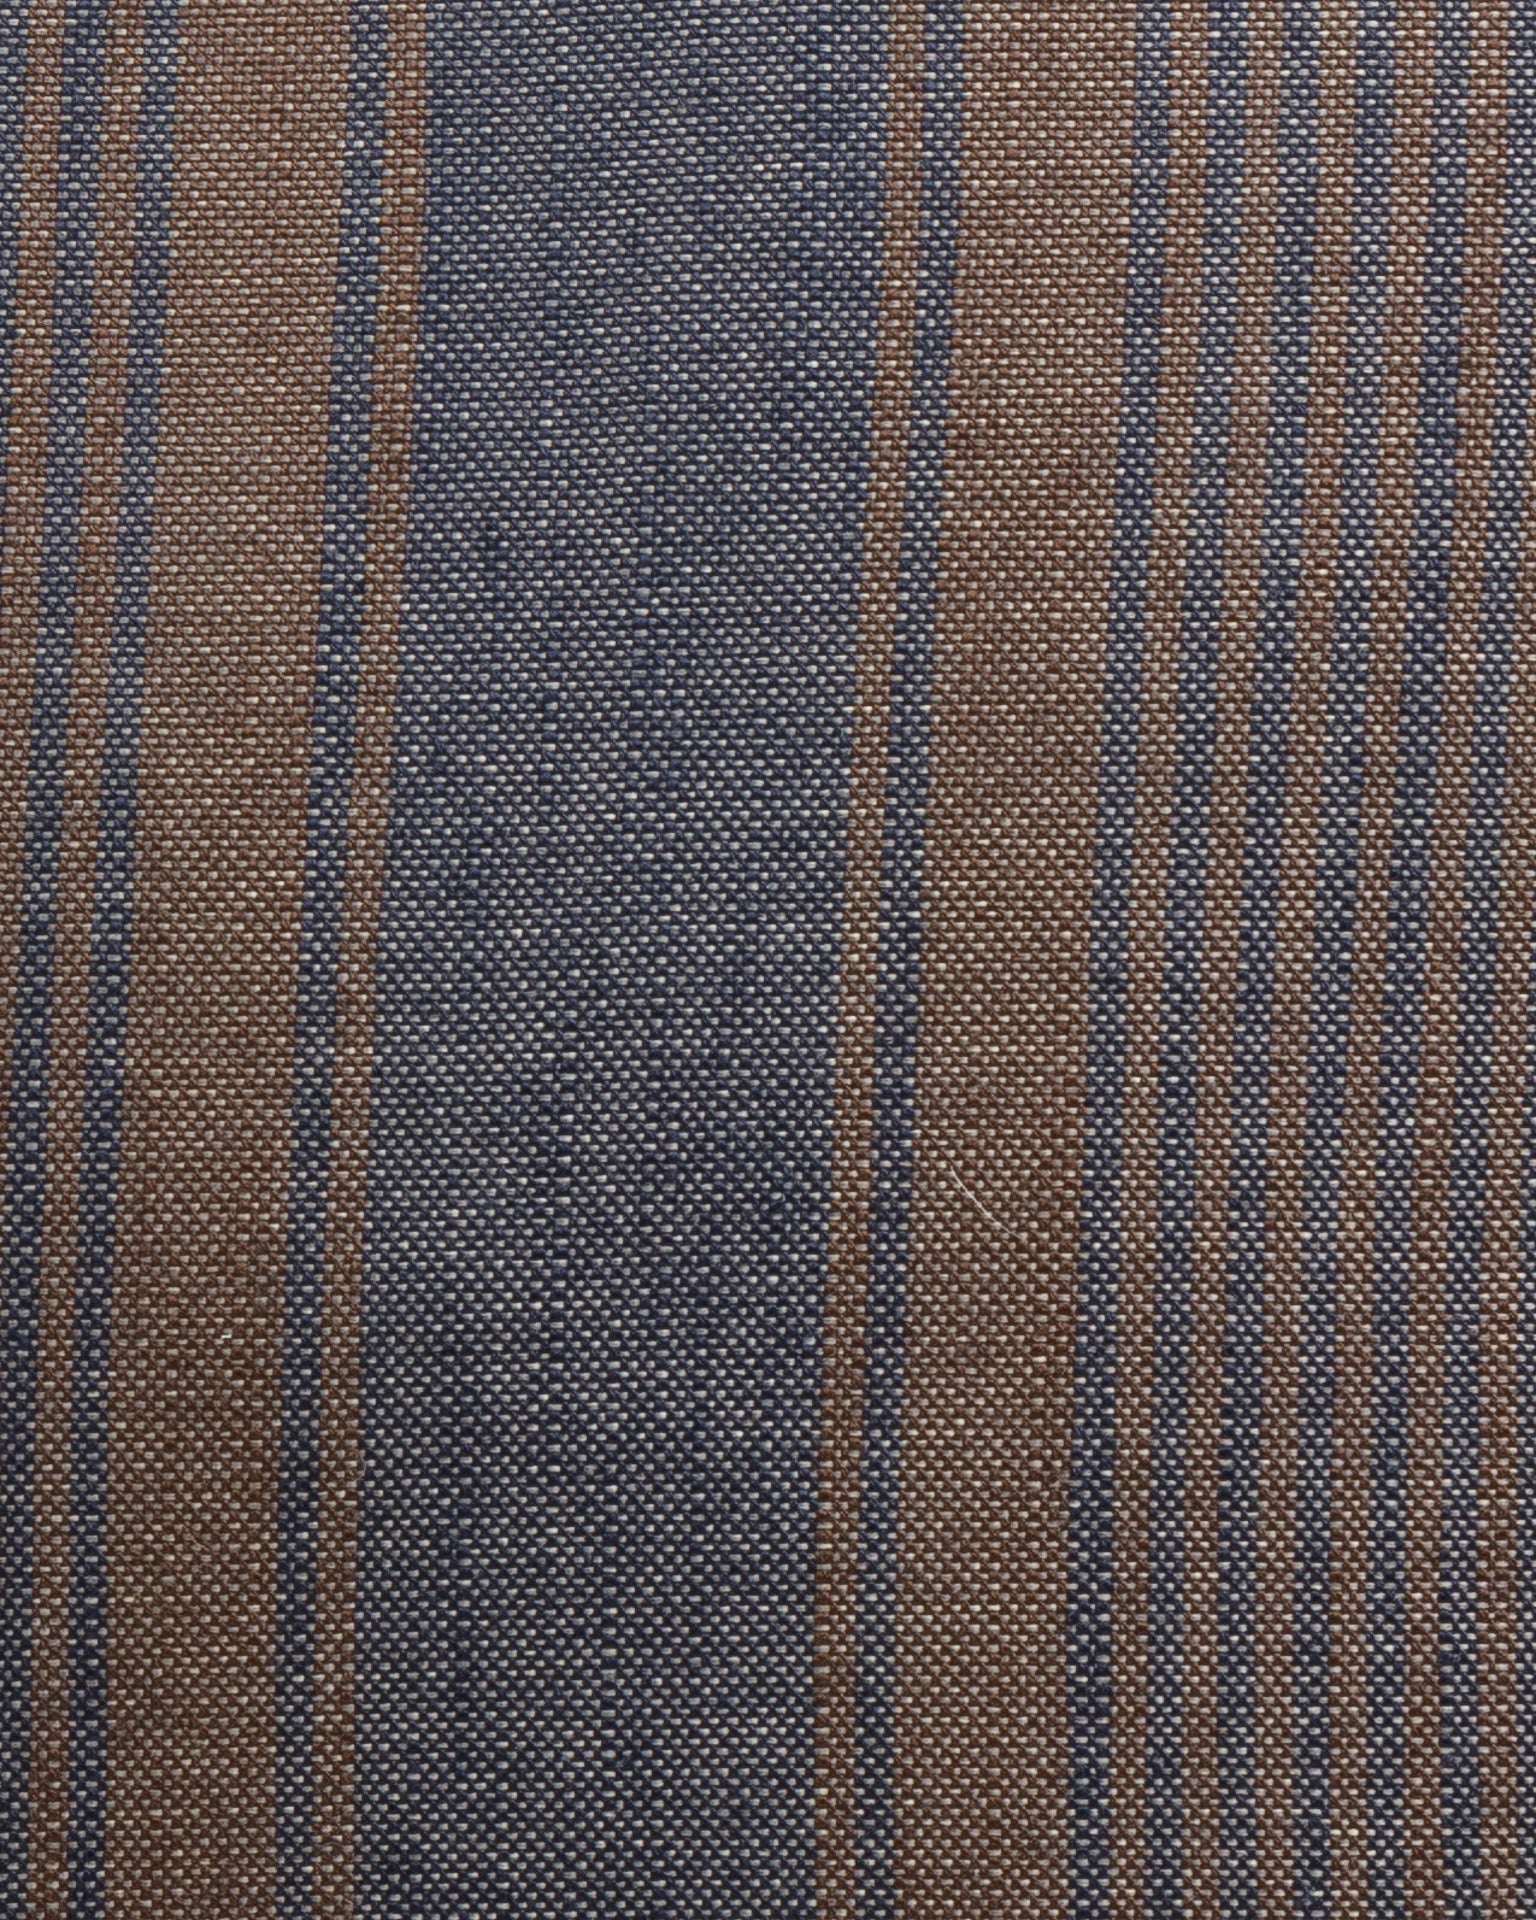 Close-up of a Casual Stripe Bark 24x24" fabric with alternating brown and navy blue stripes, detailed with fine white dots on the navy sections in a Scottsdale bungalow by Gabby.